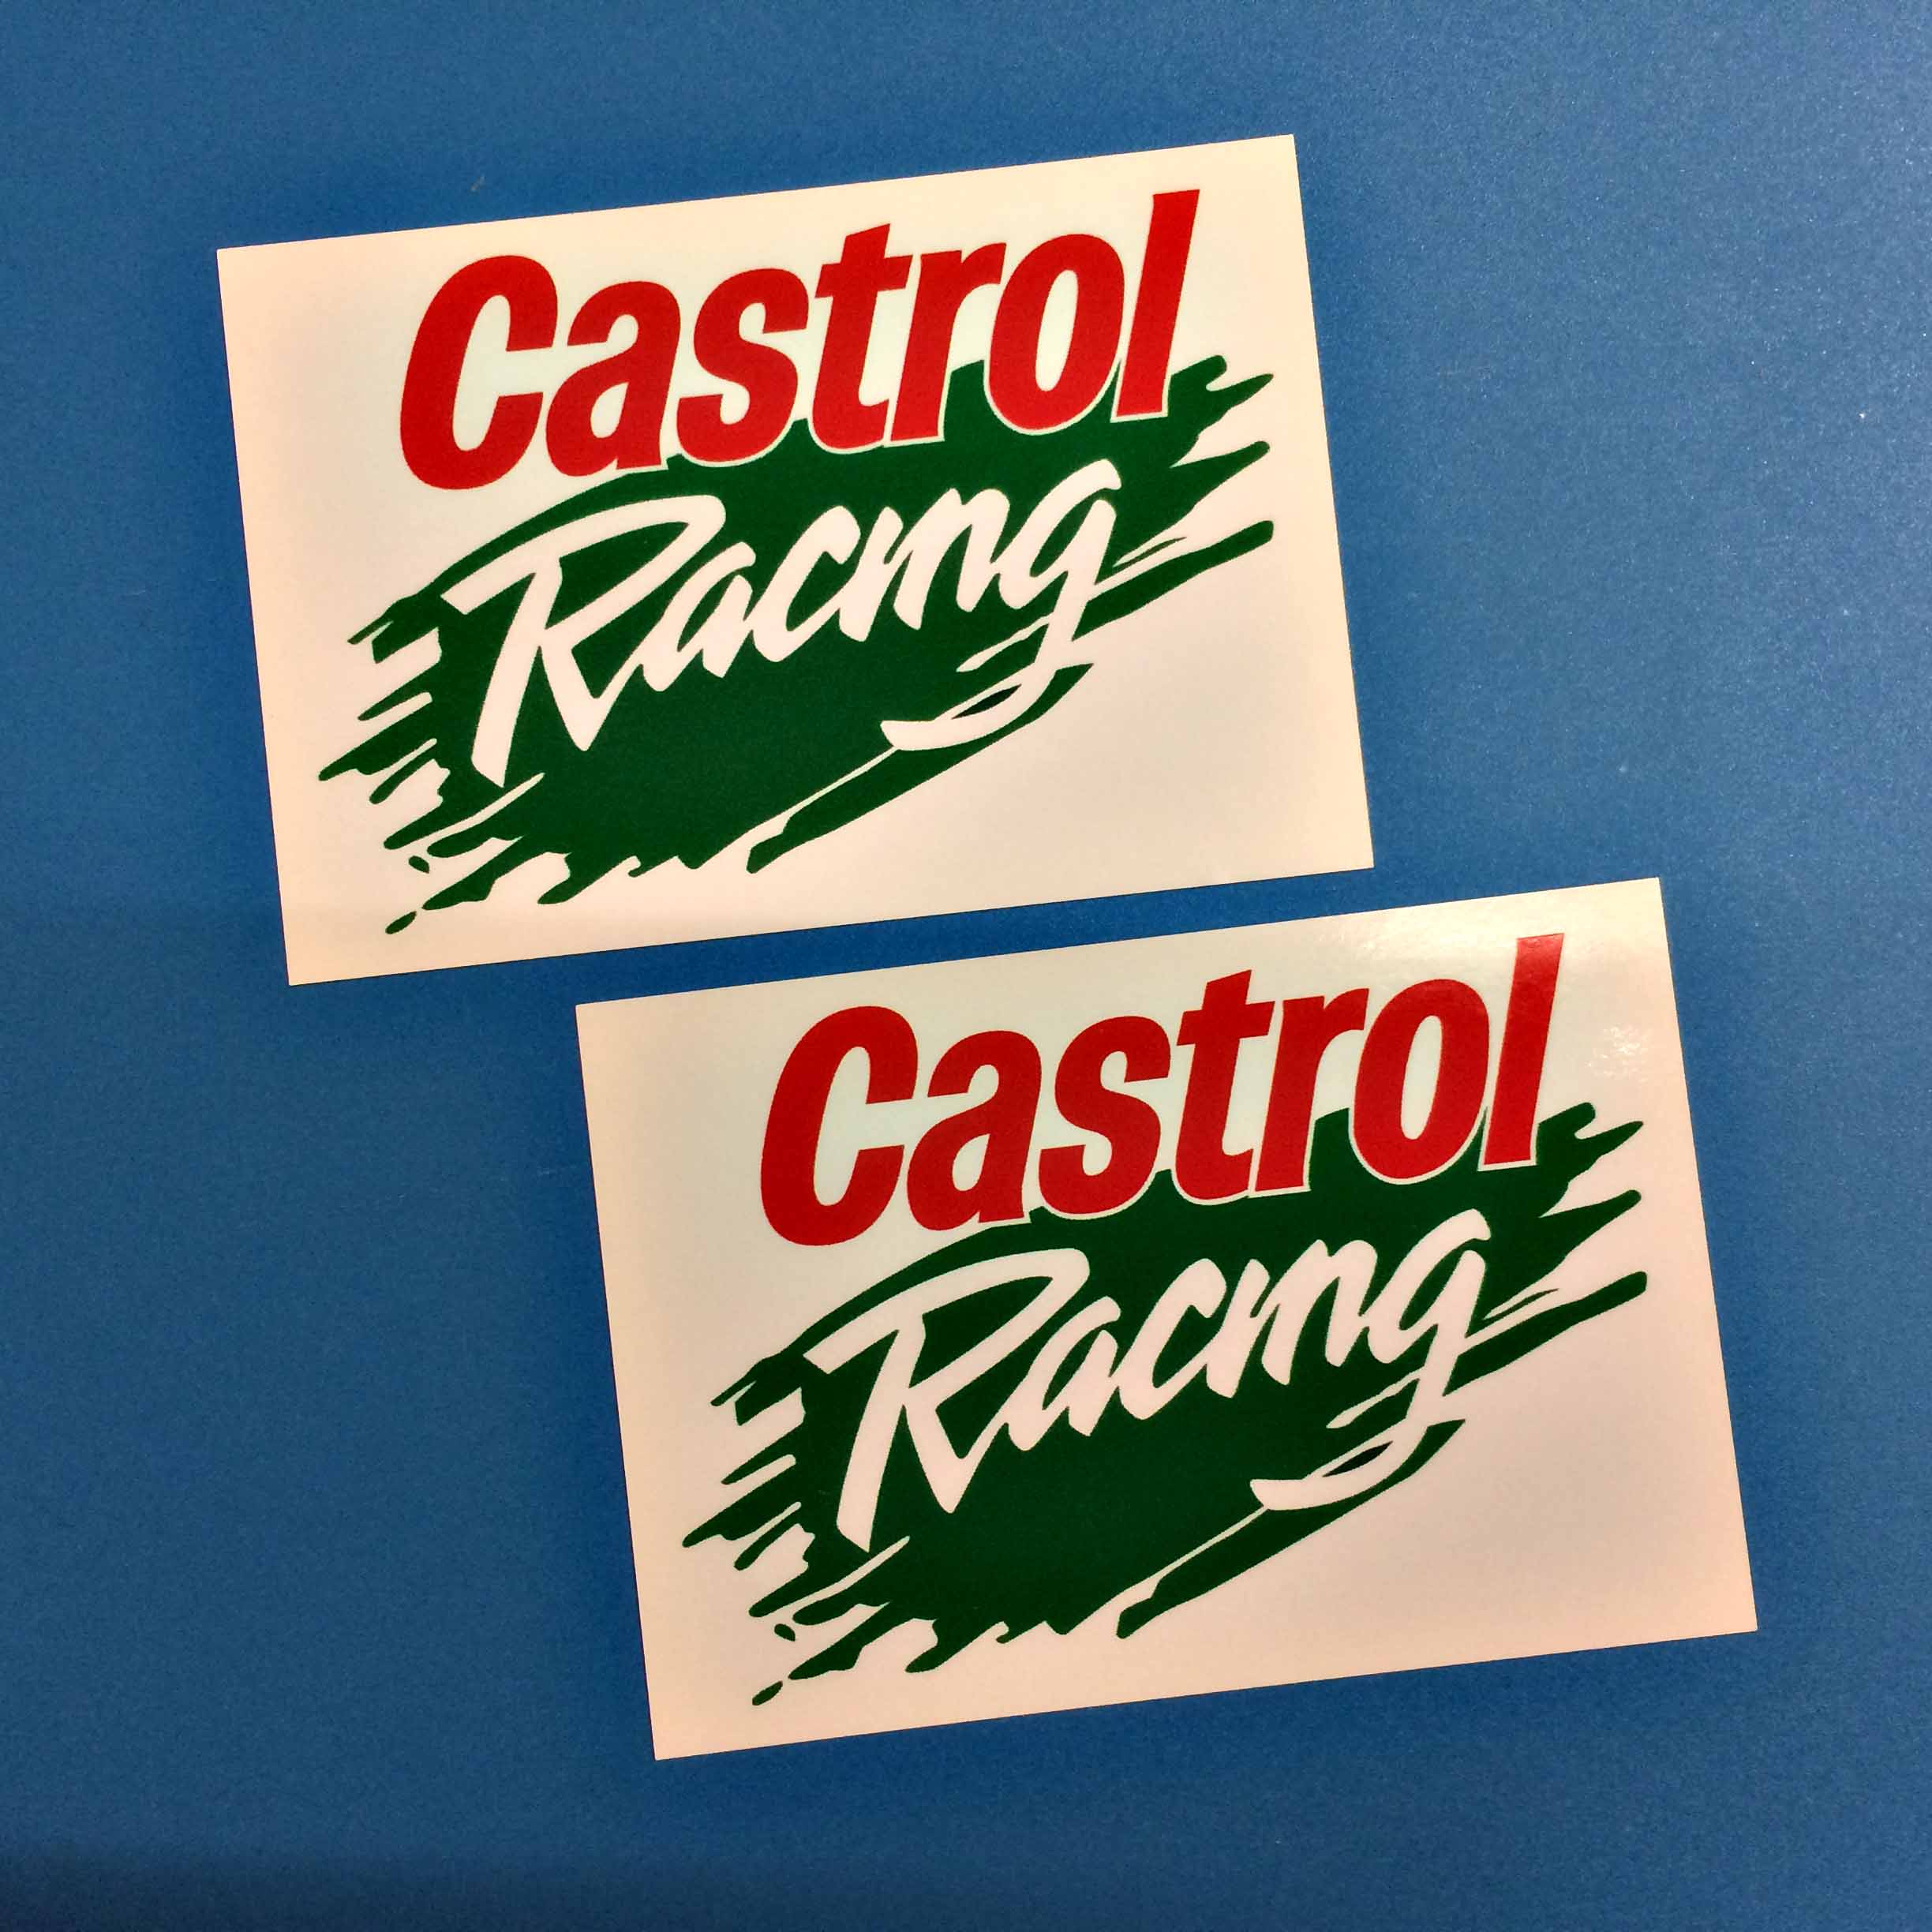 A white sticker with a green brush stroke in the centre. Castrol in red and Racing in white lettering overlays this.